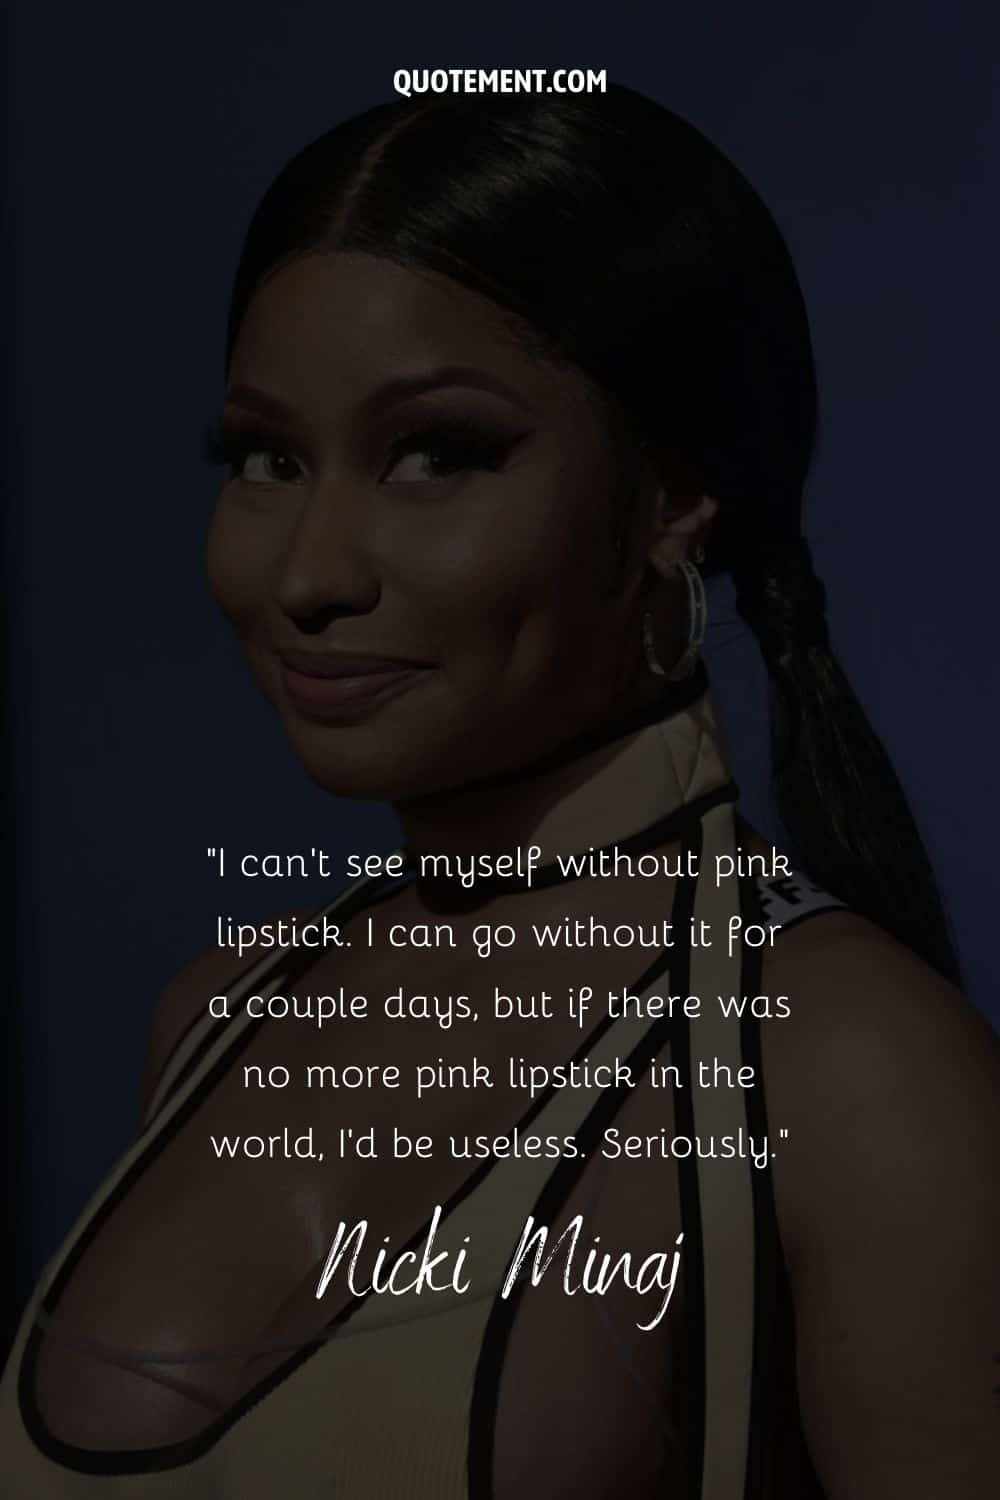 Funny quote by Nicki mentioning pink lipstick, and her portrait in the background, too